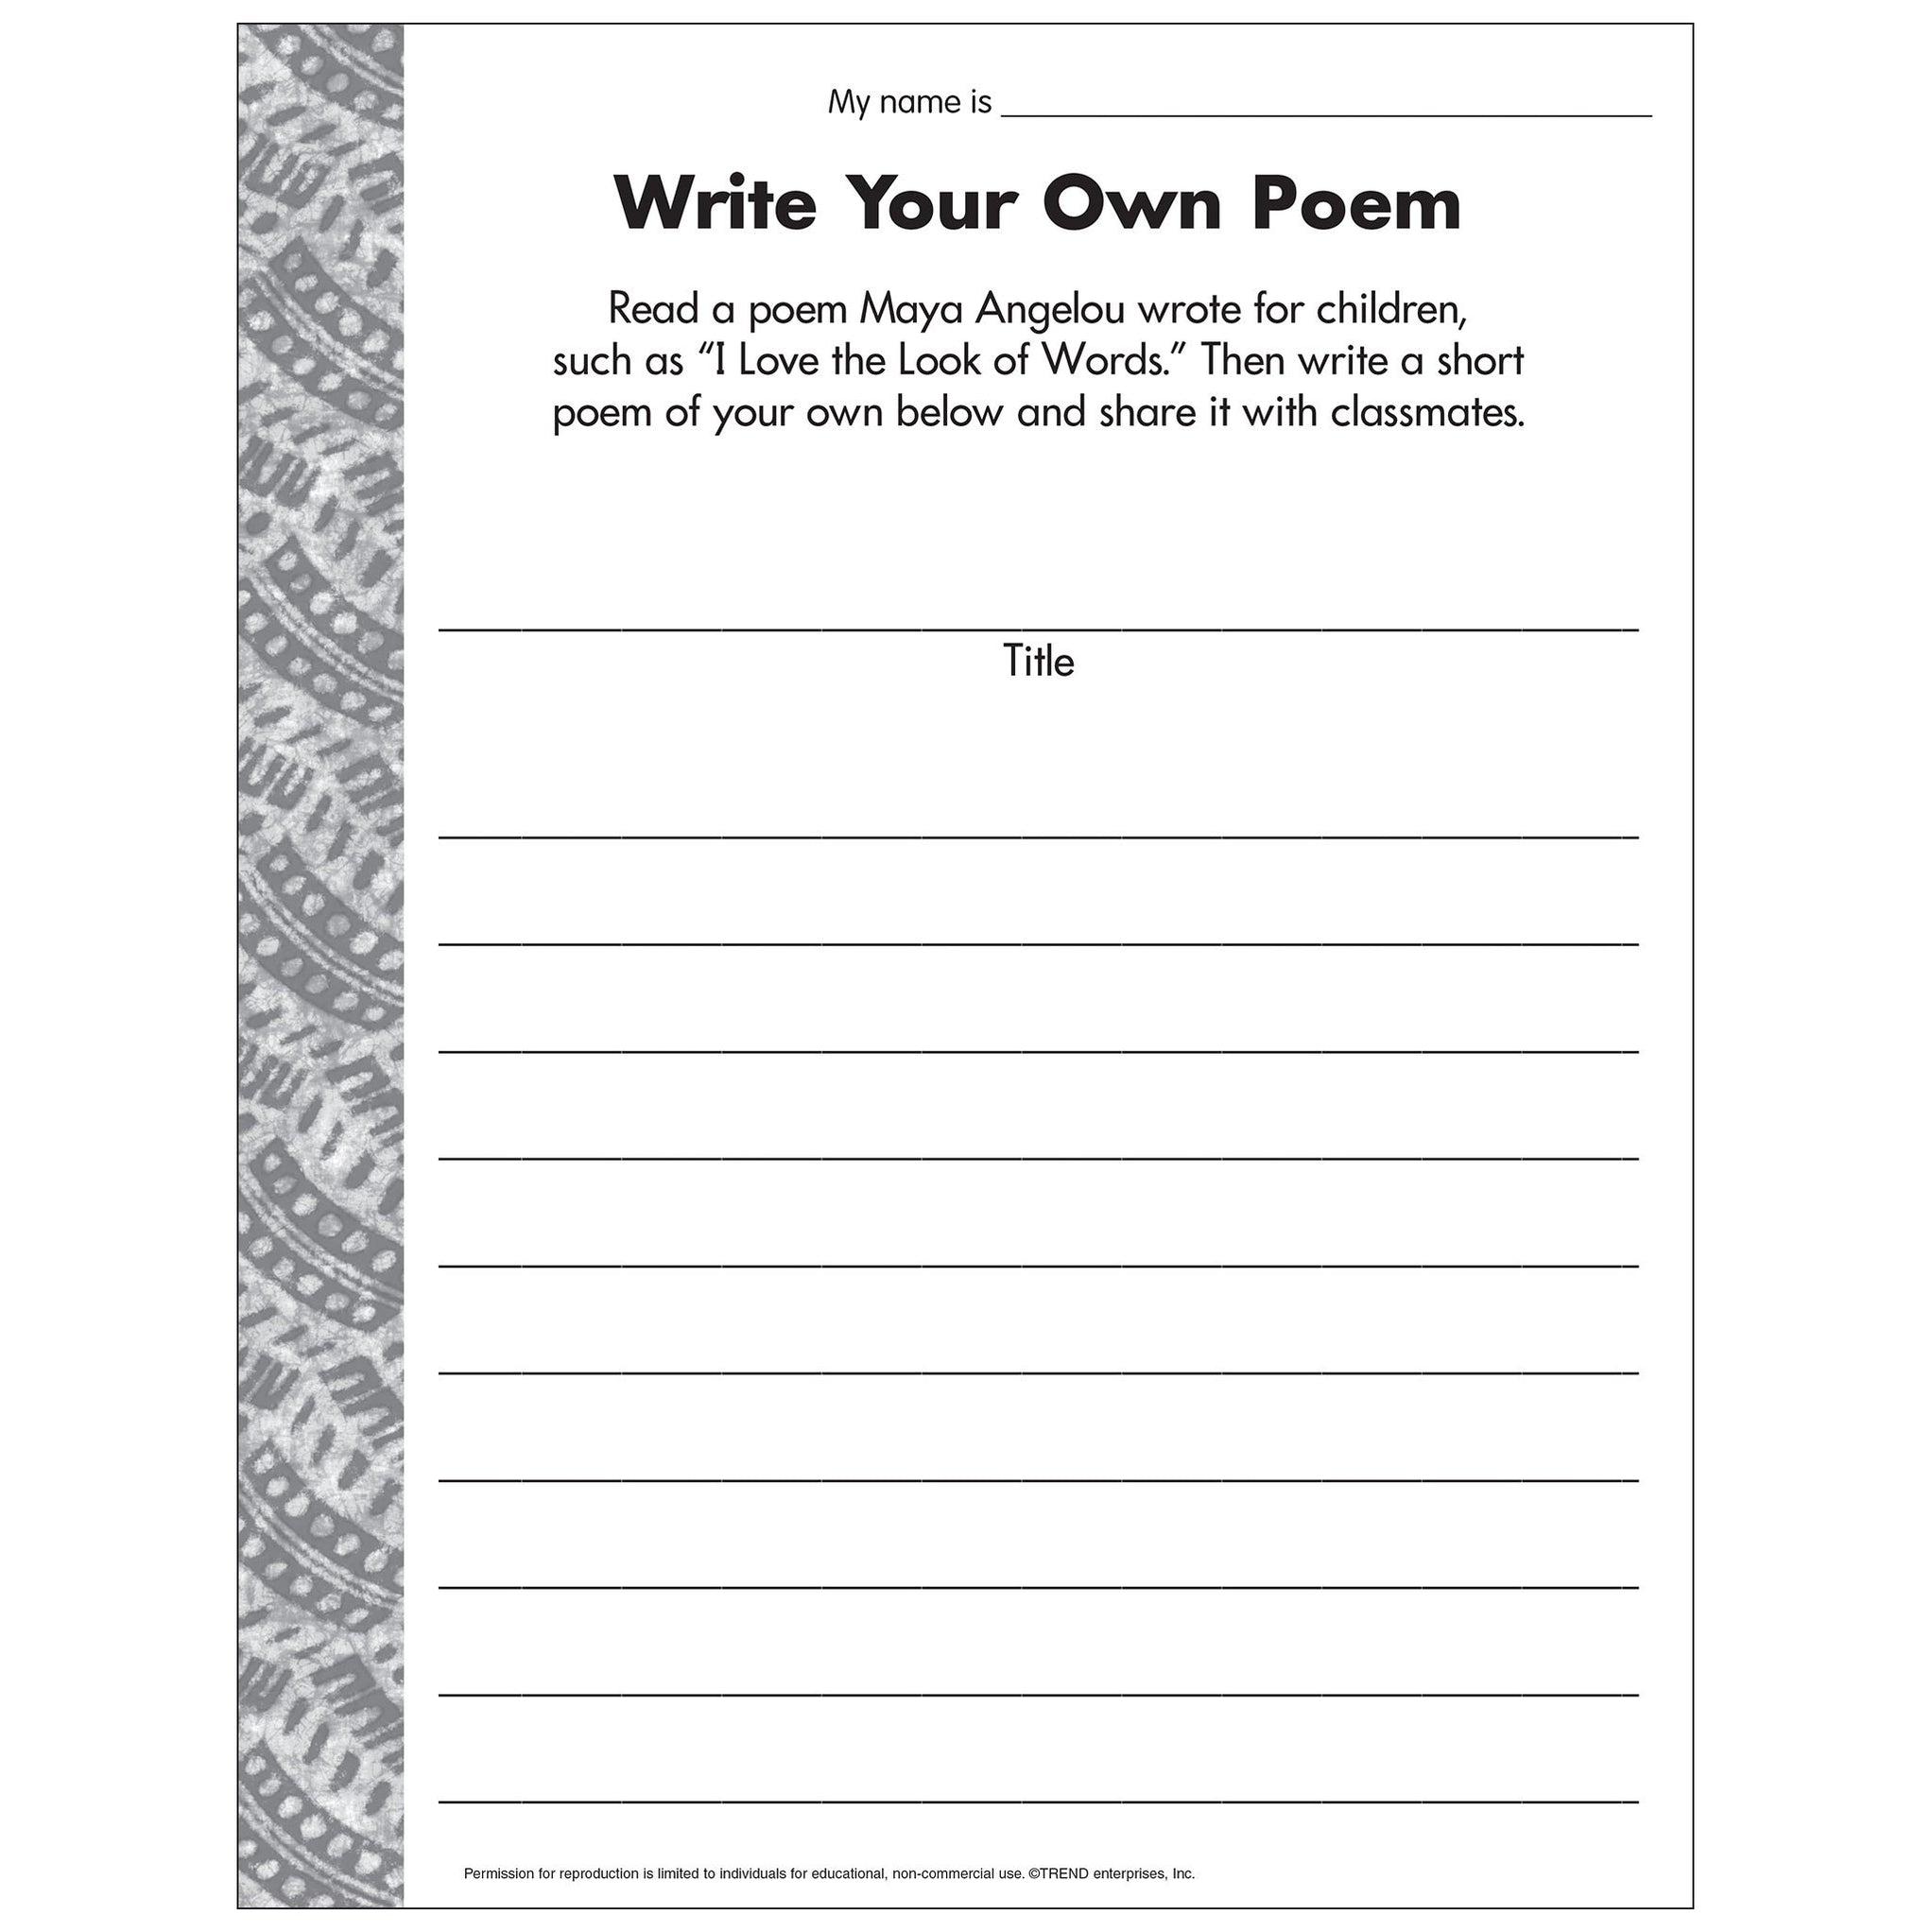 write your own poem assignment